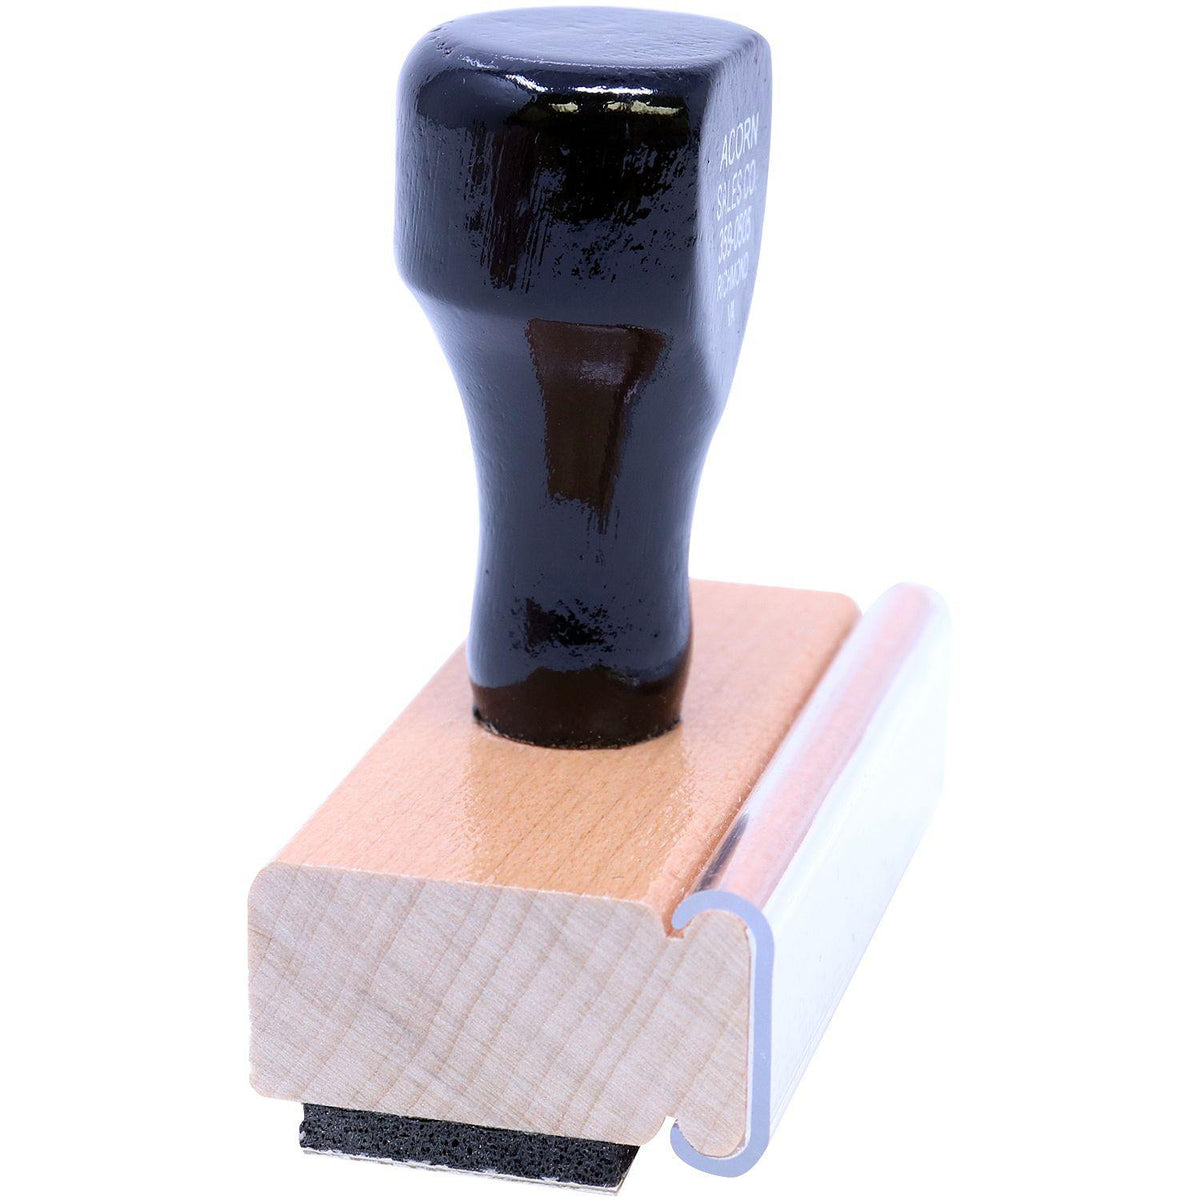 Late Rubber Stamp - Engineer Seal Stamps - Brand_Acorn, Impression Size_Small, Stamp Type_Regular Stamp, Type of Use_Teacher